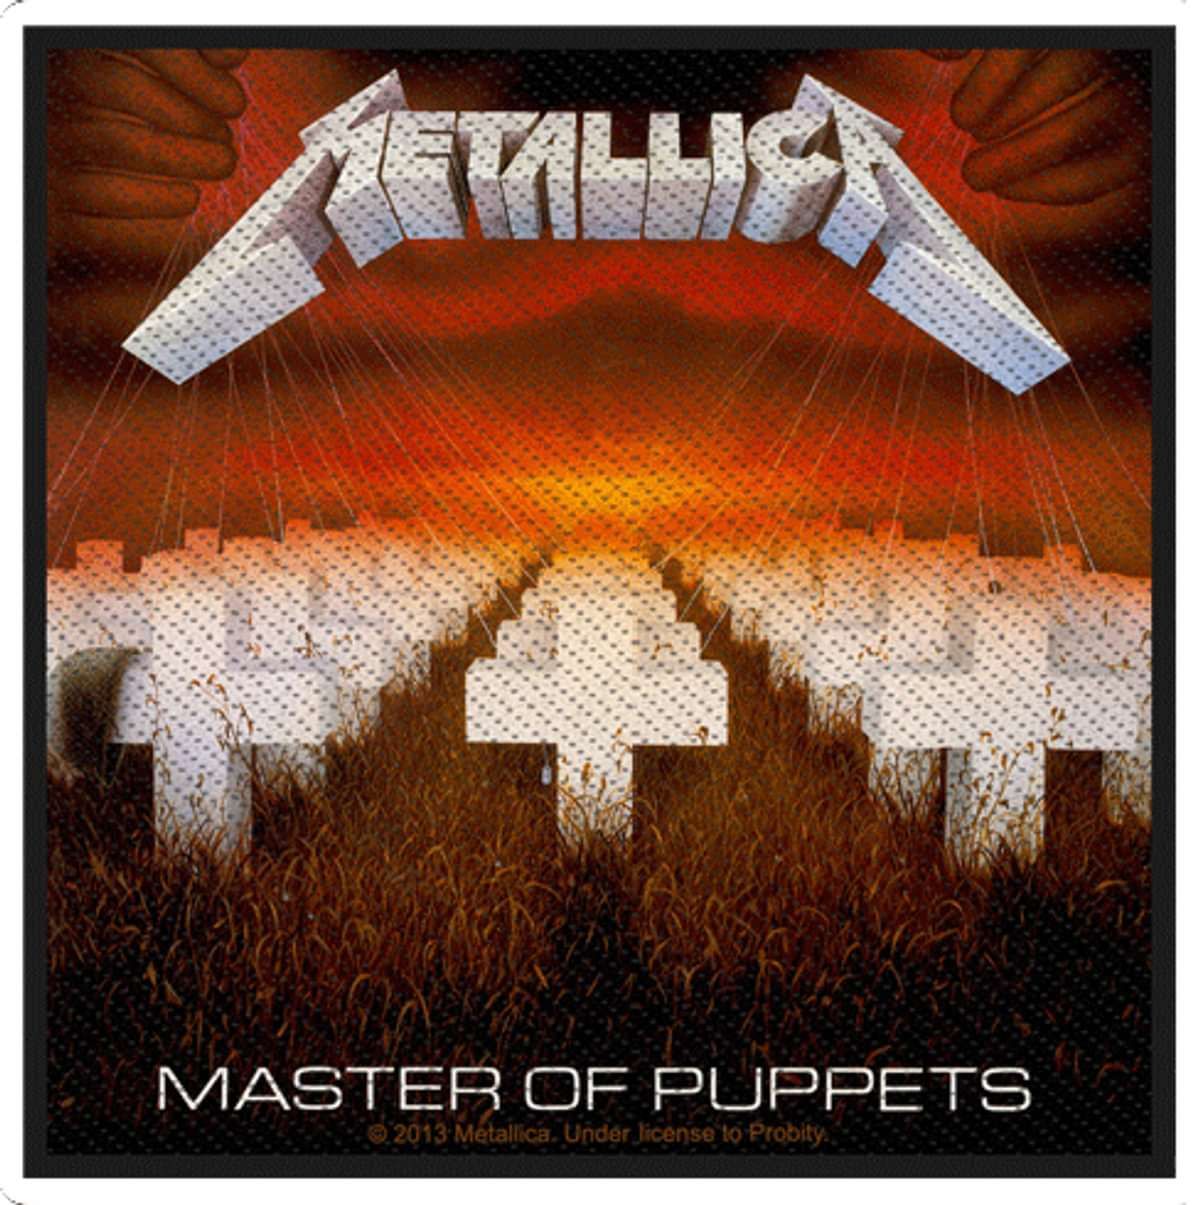 Metallica, Metallica Patch - Master Of Puppets Patch (Nunslayer's)